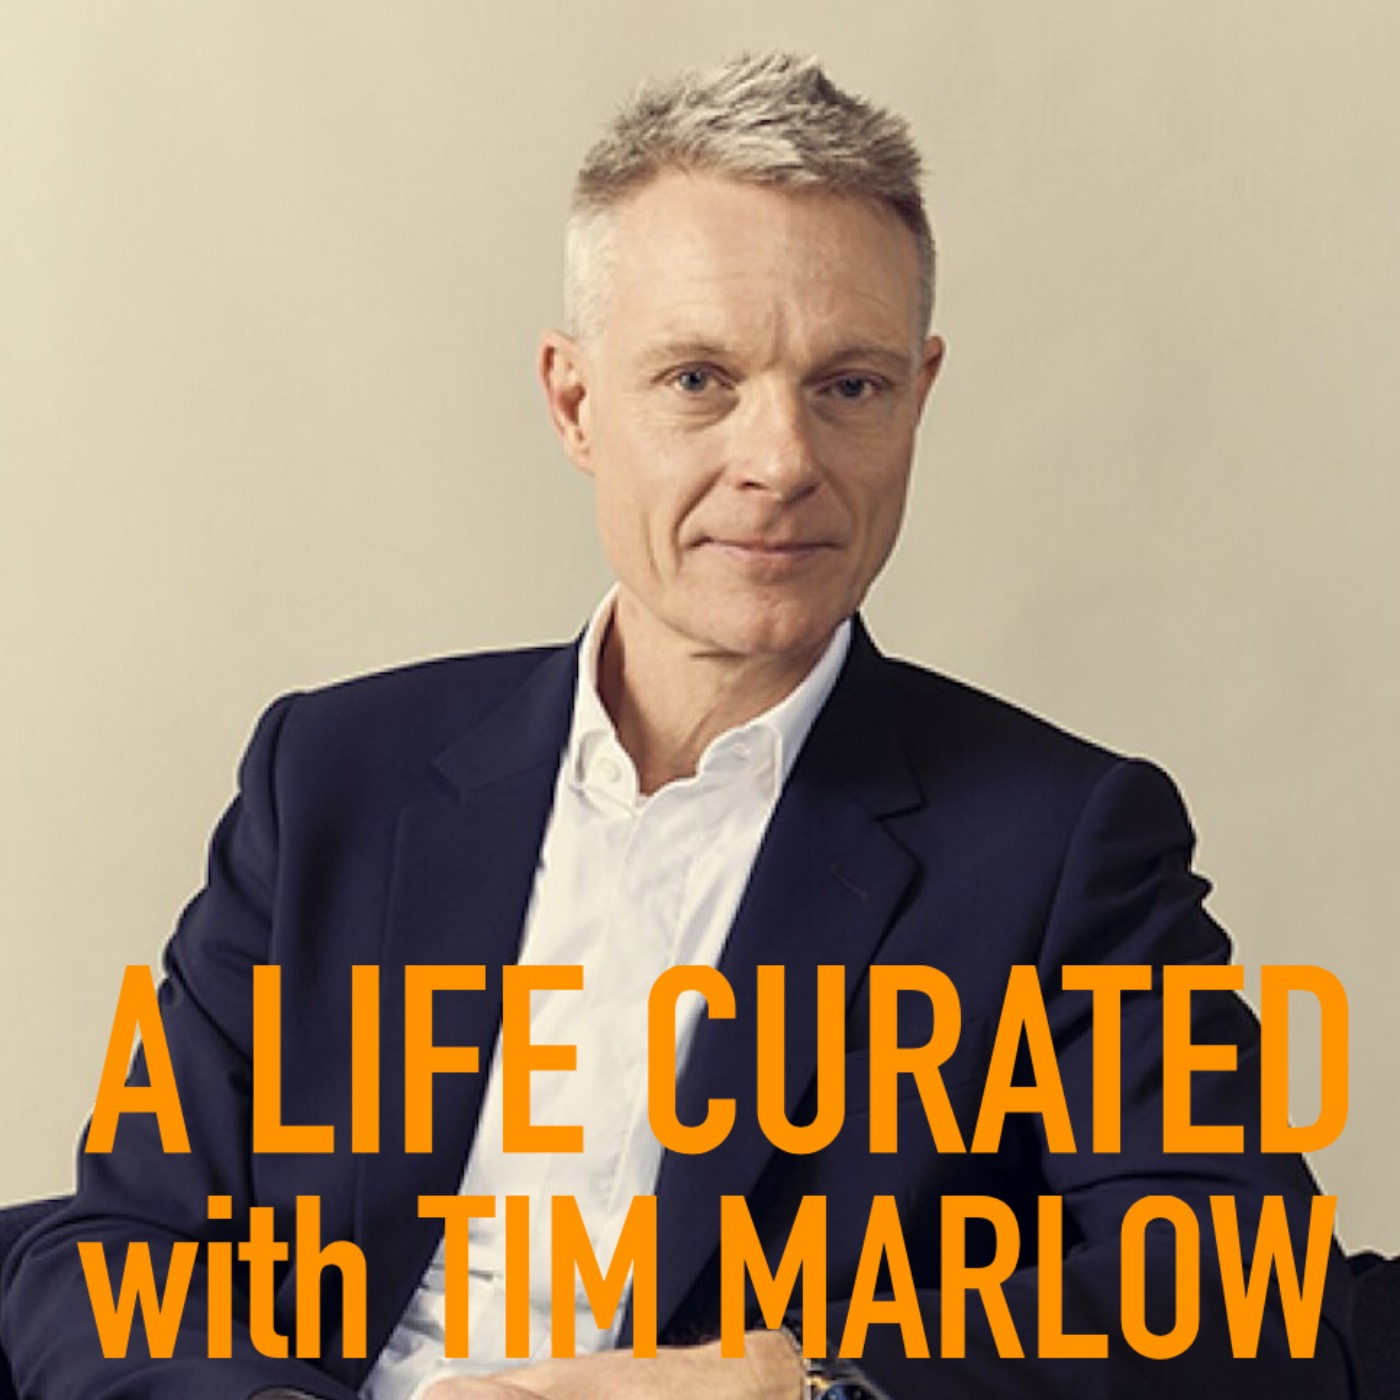 A Life Curated with Tim Marlow